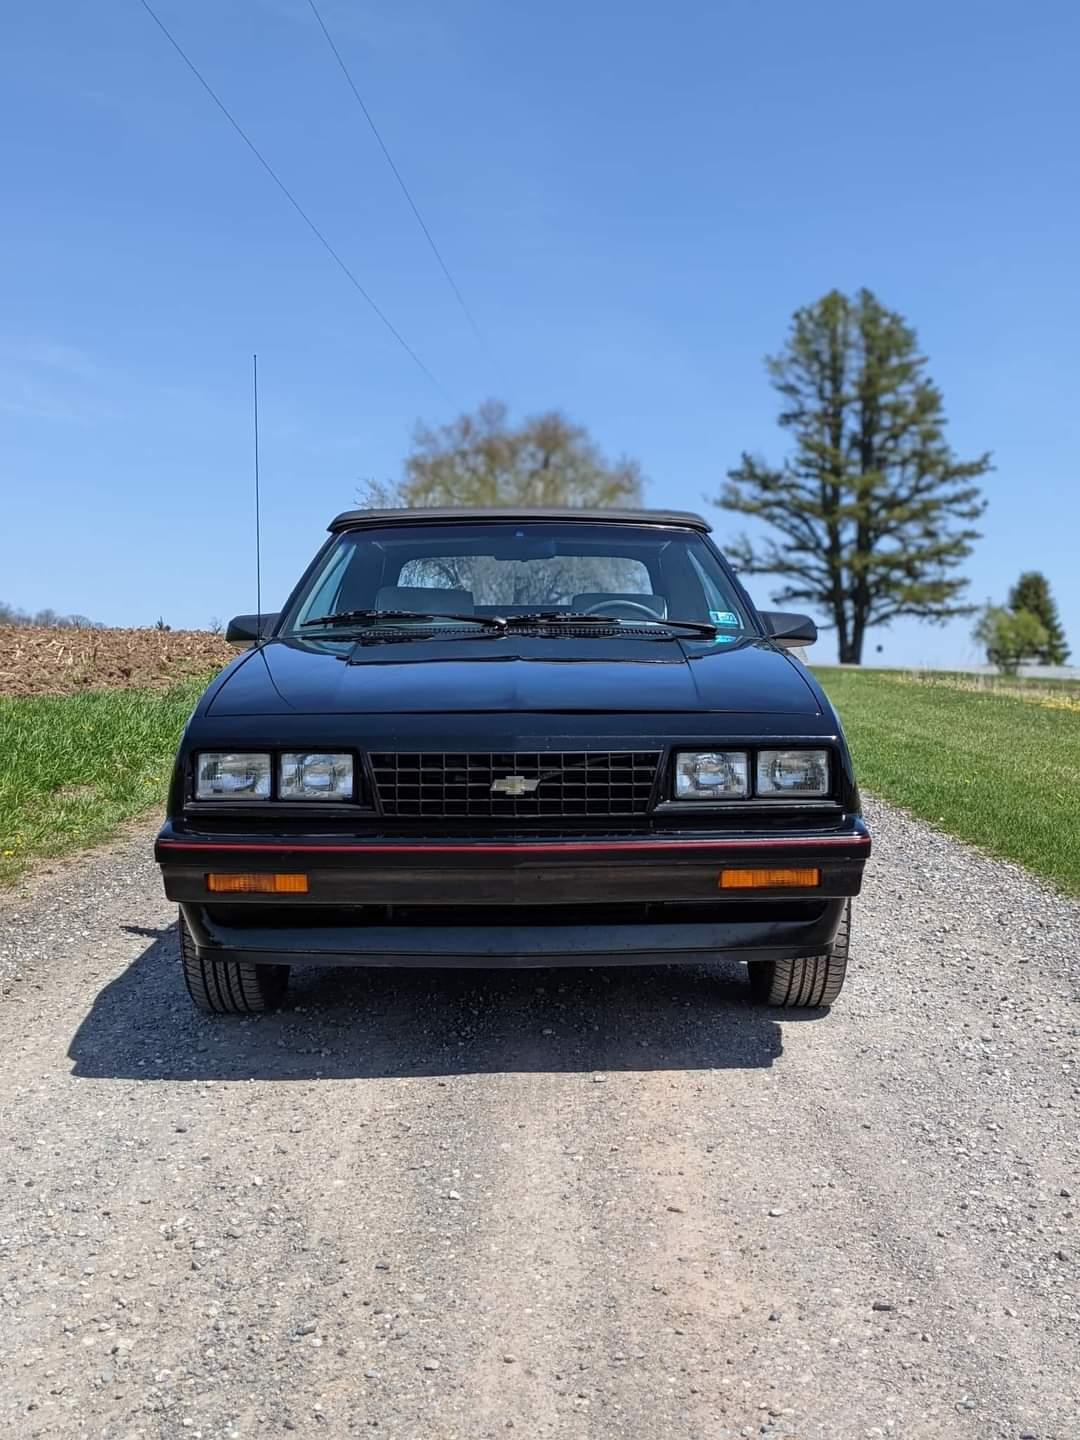 1987 Chevrolet Cavalier RS Convertible. 2.8L V6. Believed to be low actual